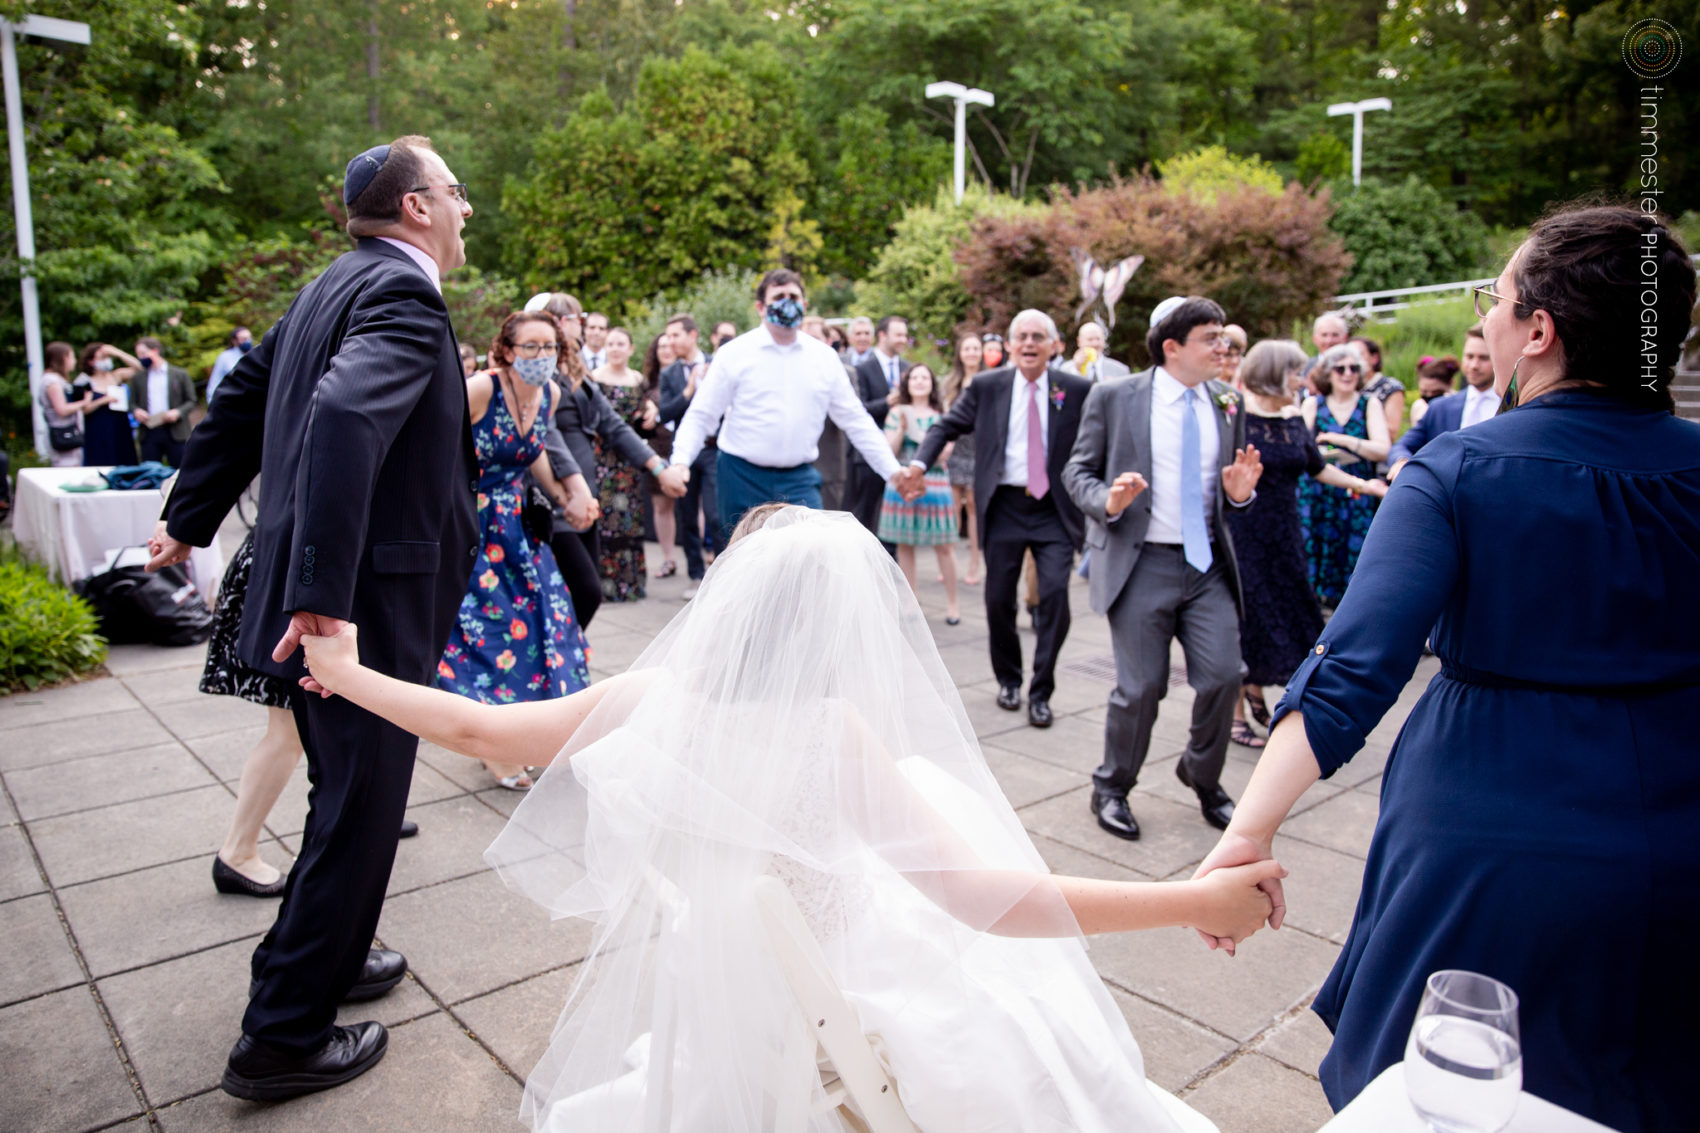 A Jewish wedding ceremony outside the butterfly conservatory at the Museum of Life and Science